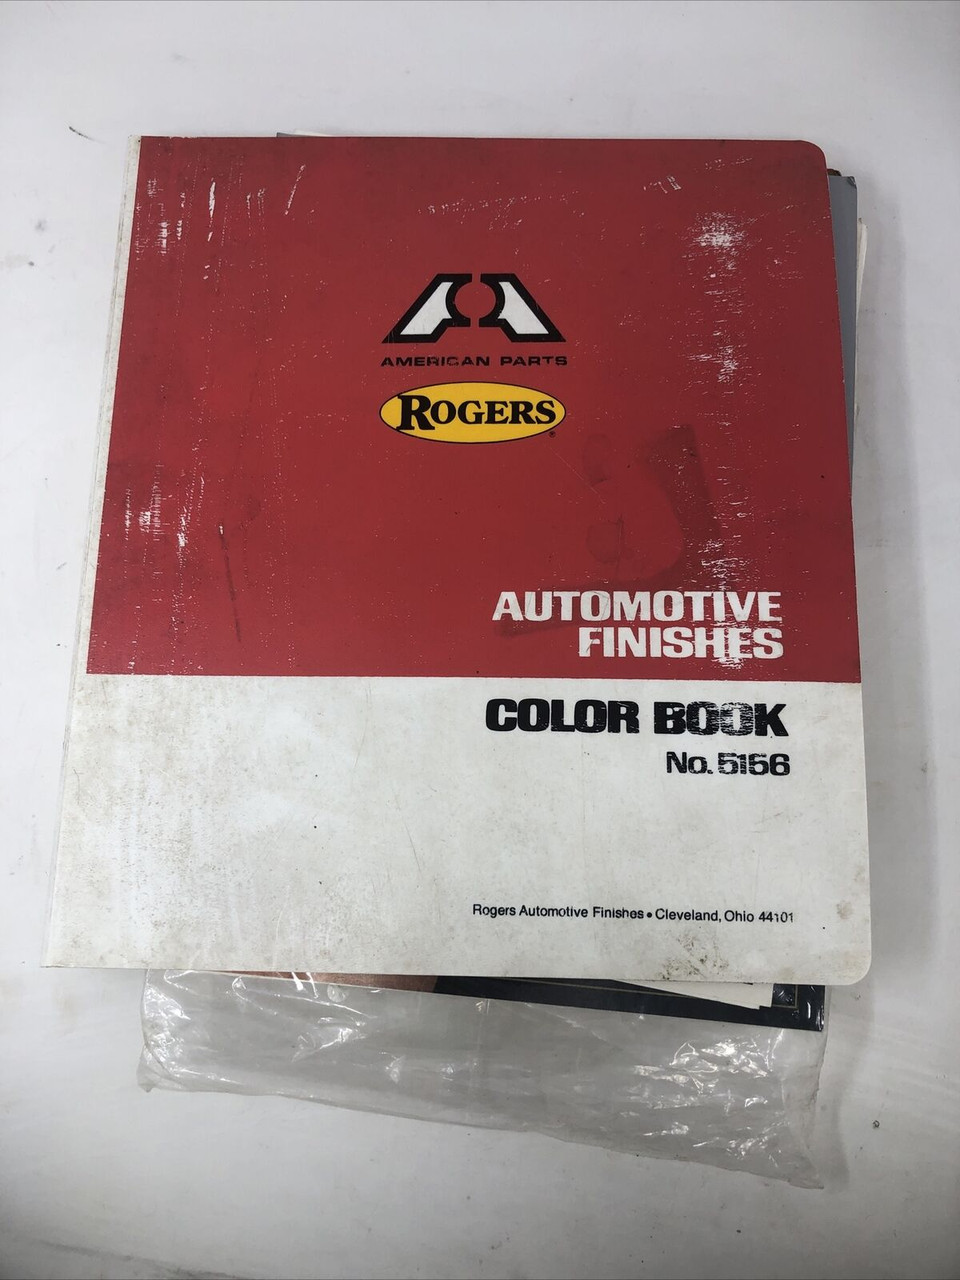 AMERICAN PARTS ROGERS AUTOMOTIVE FINISHES COLOR BOOK MAUNAL 1971-77 5156 -PREOWN